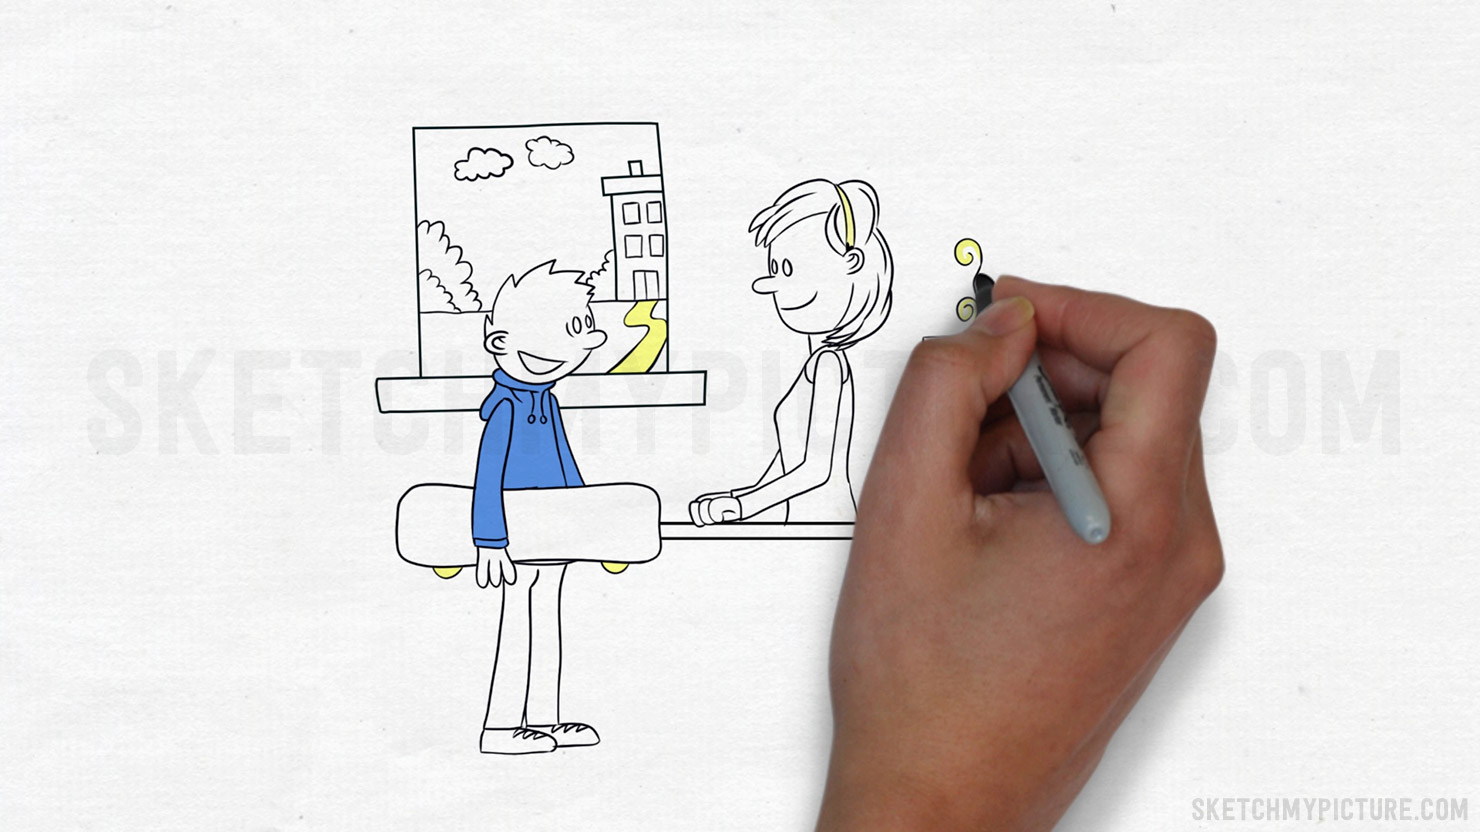 Sketch My Picture - Whiteboard Animation Production